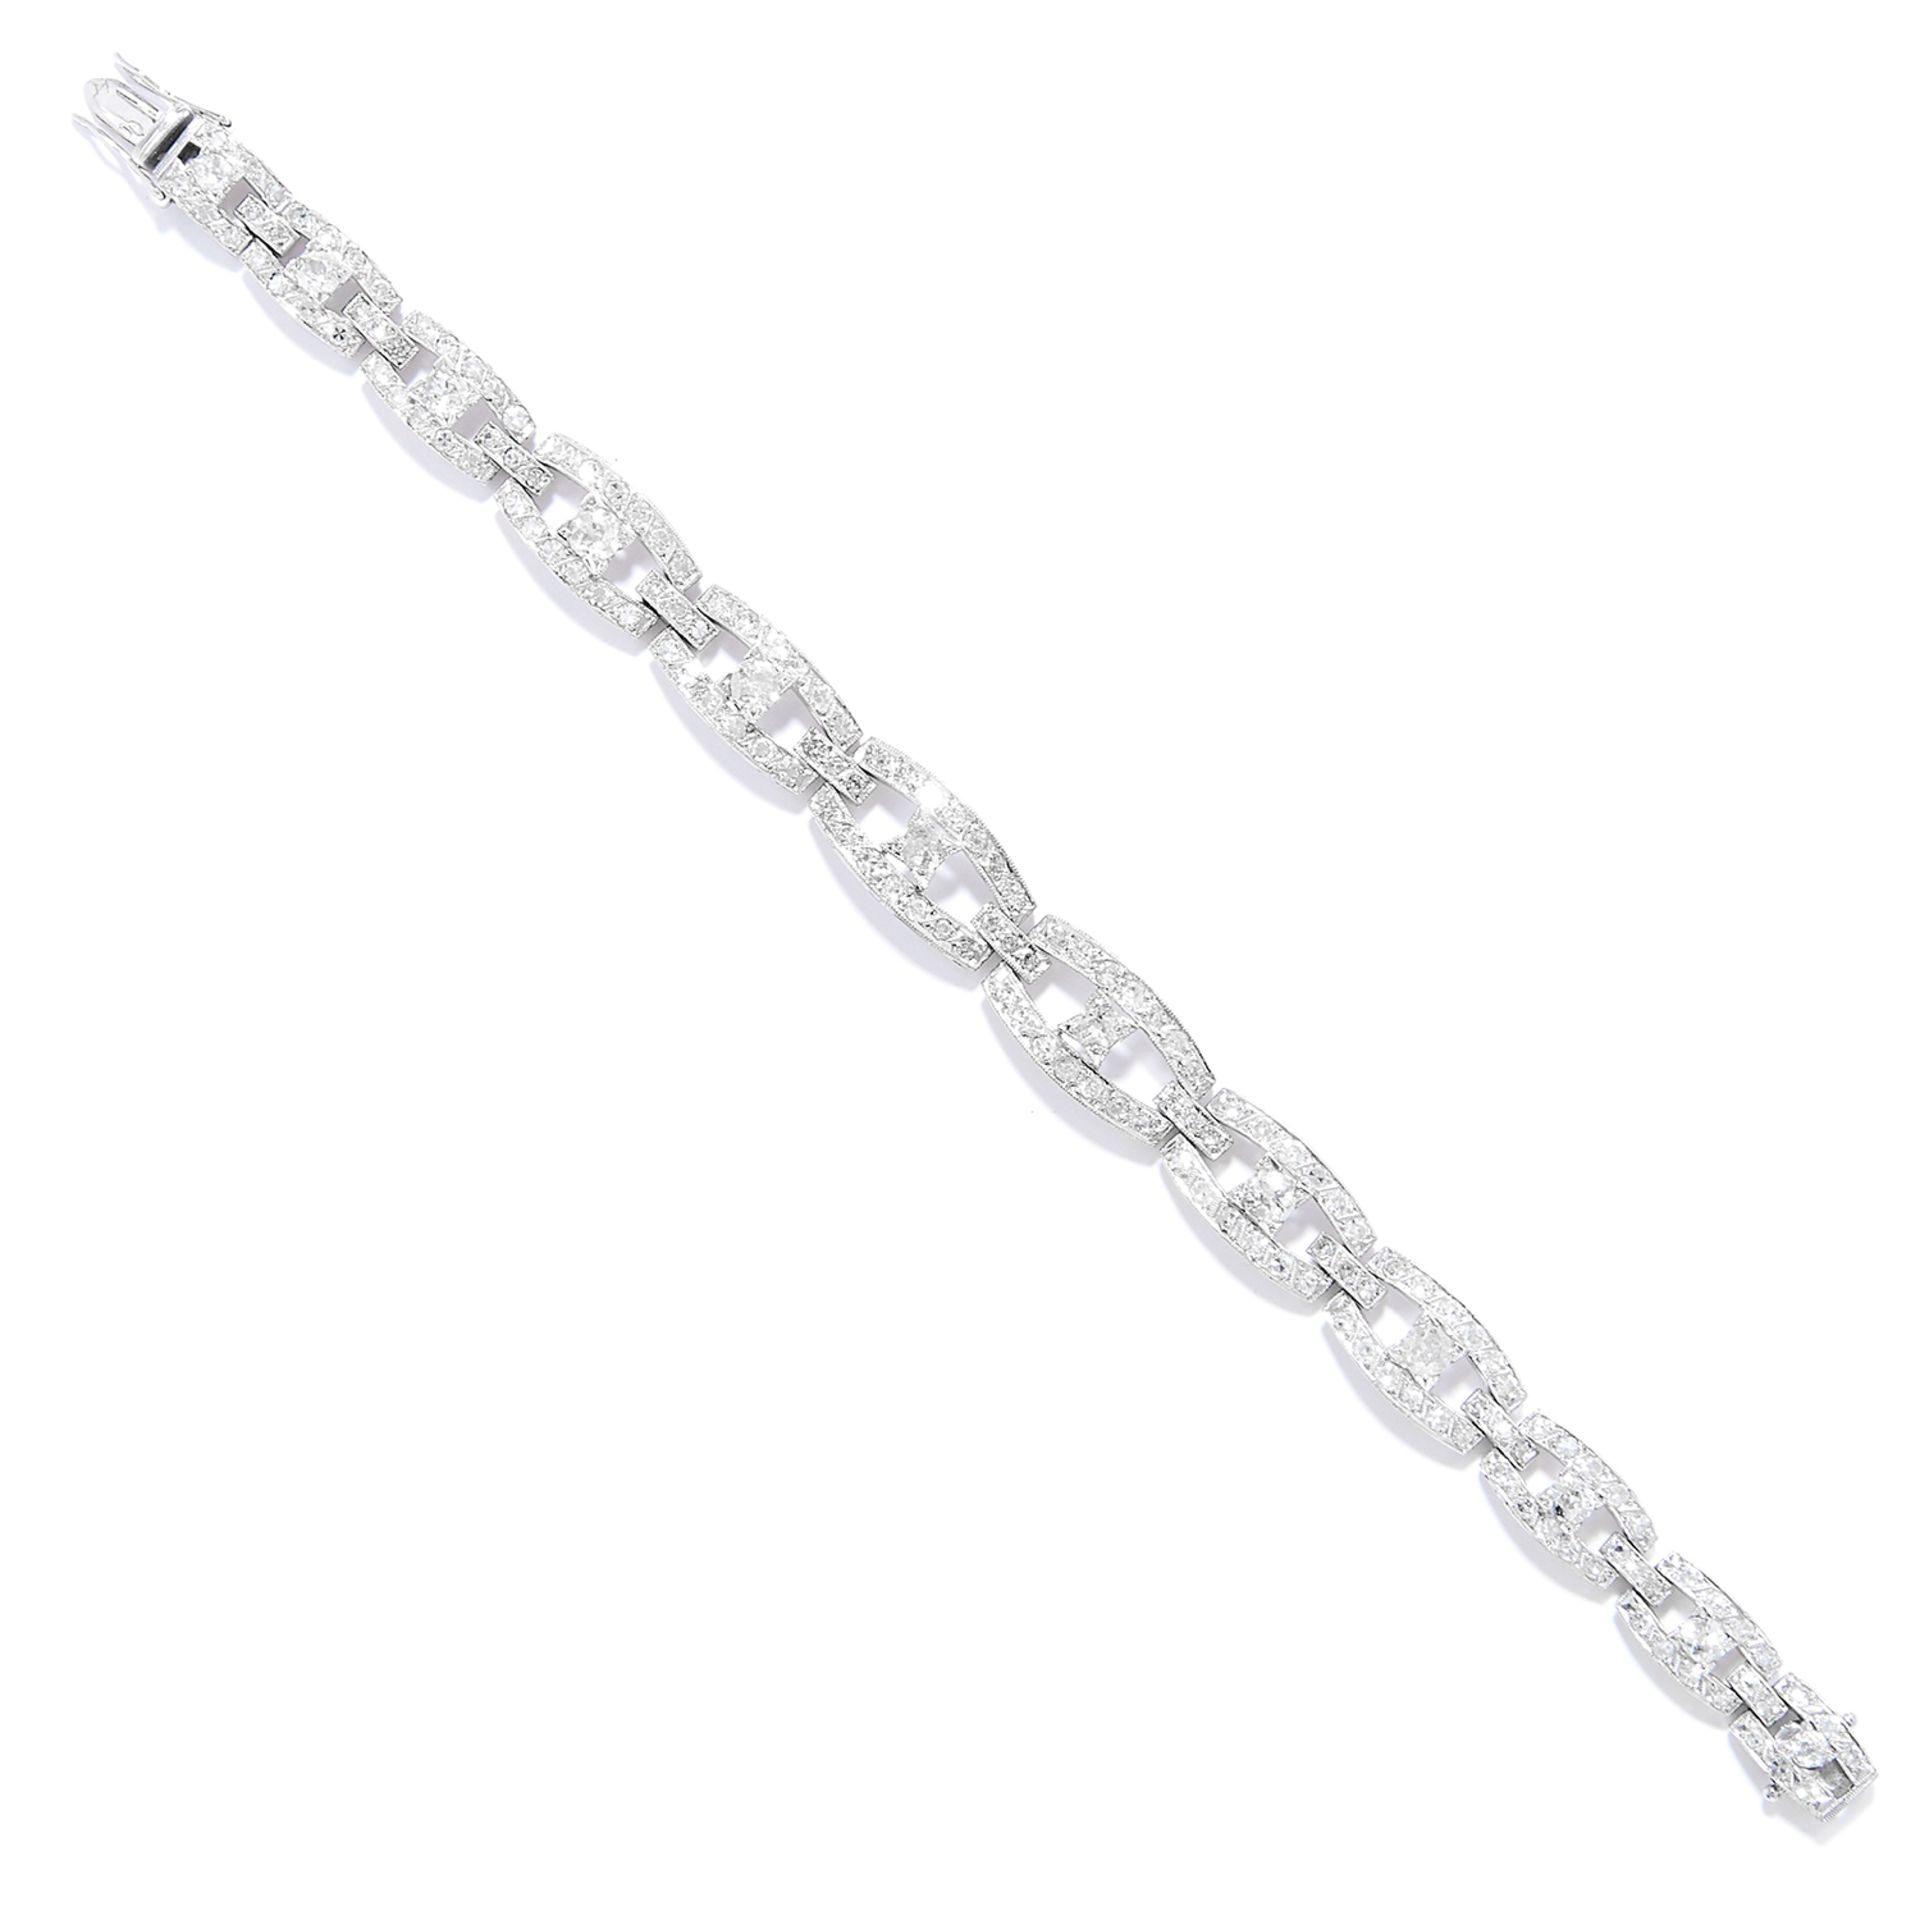 DIAMOND BRACELET, CIRCA 1950 in white gold or platinum, in Art Deco style, set with round and old